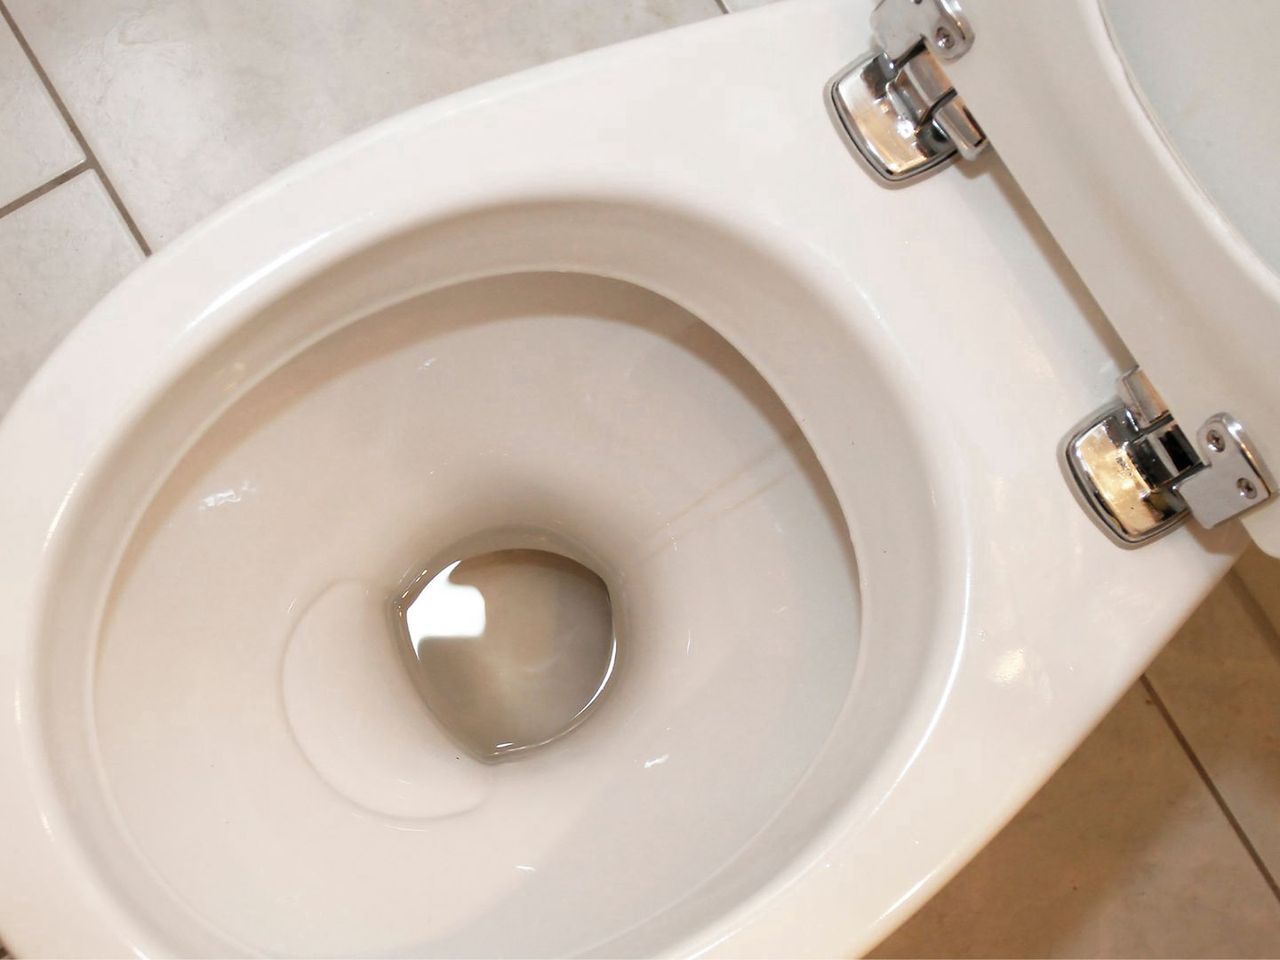 A toilet that is not cleaned thoroughly is a source of unpleasant smells.